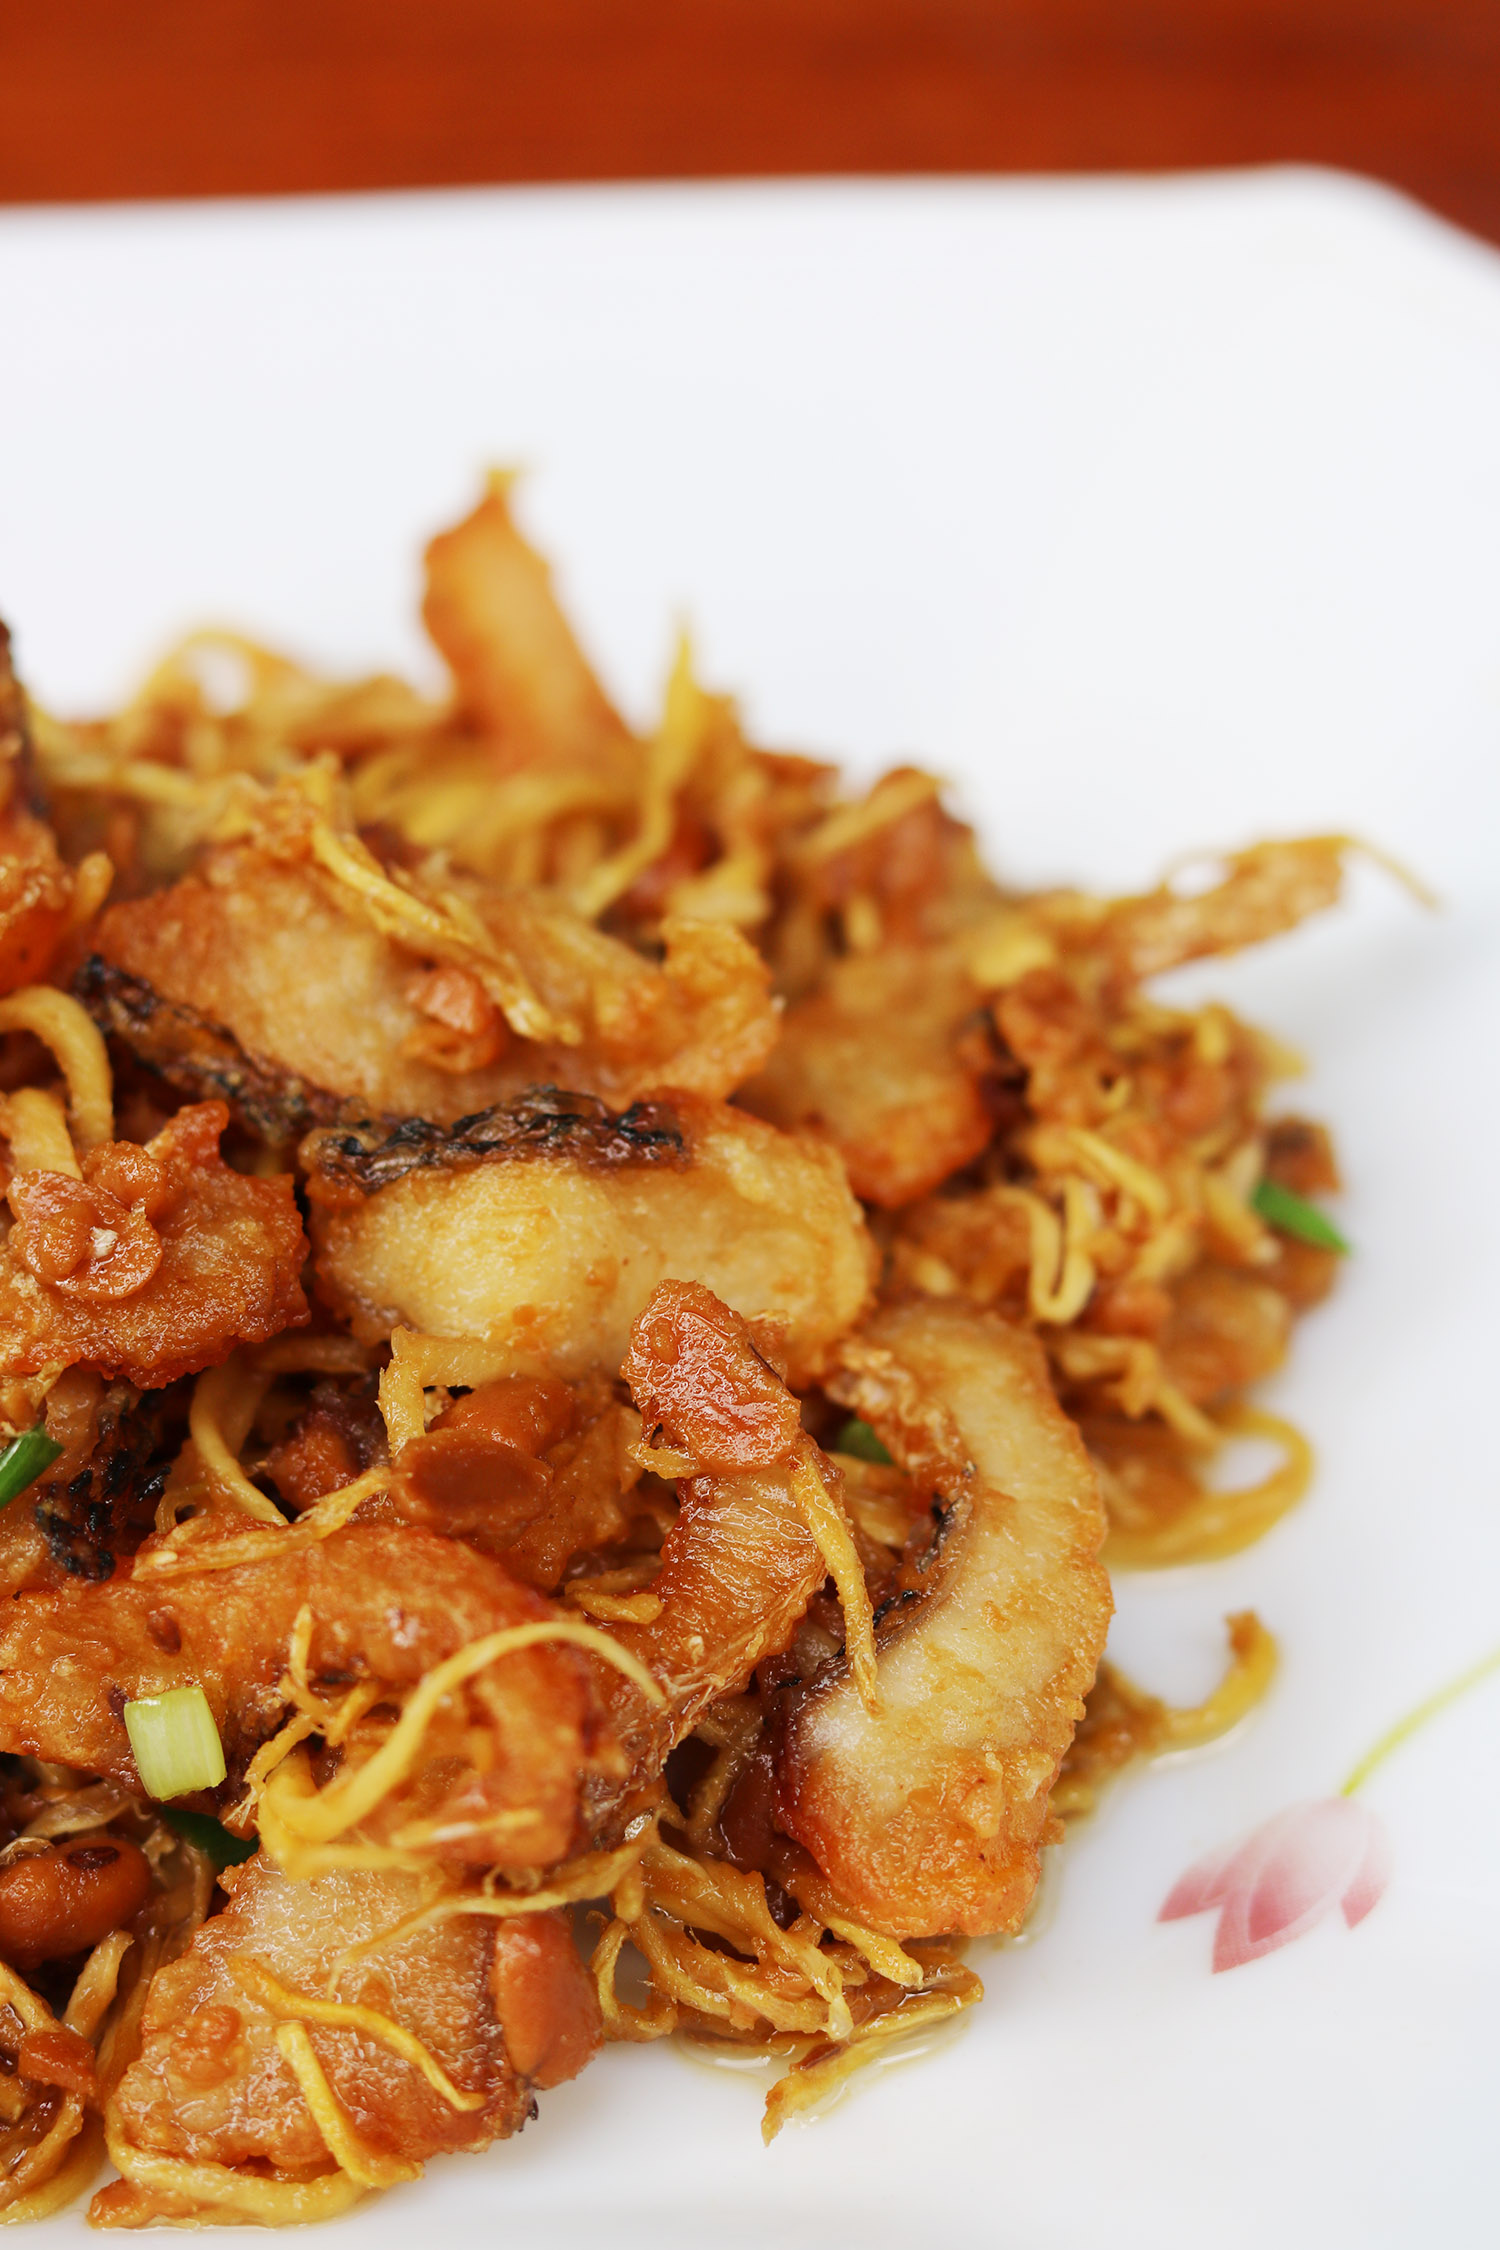 Recipe: Cambodian crispy fried fish with ginger and fermented soybean (trey chien chuon)